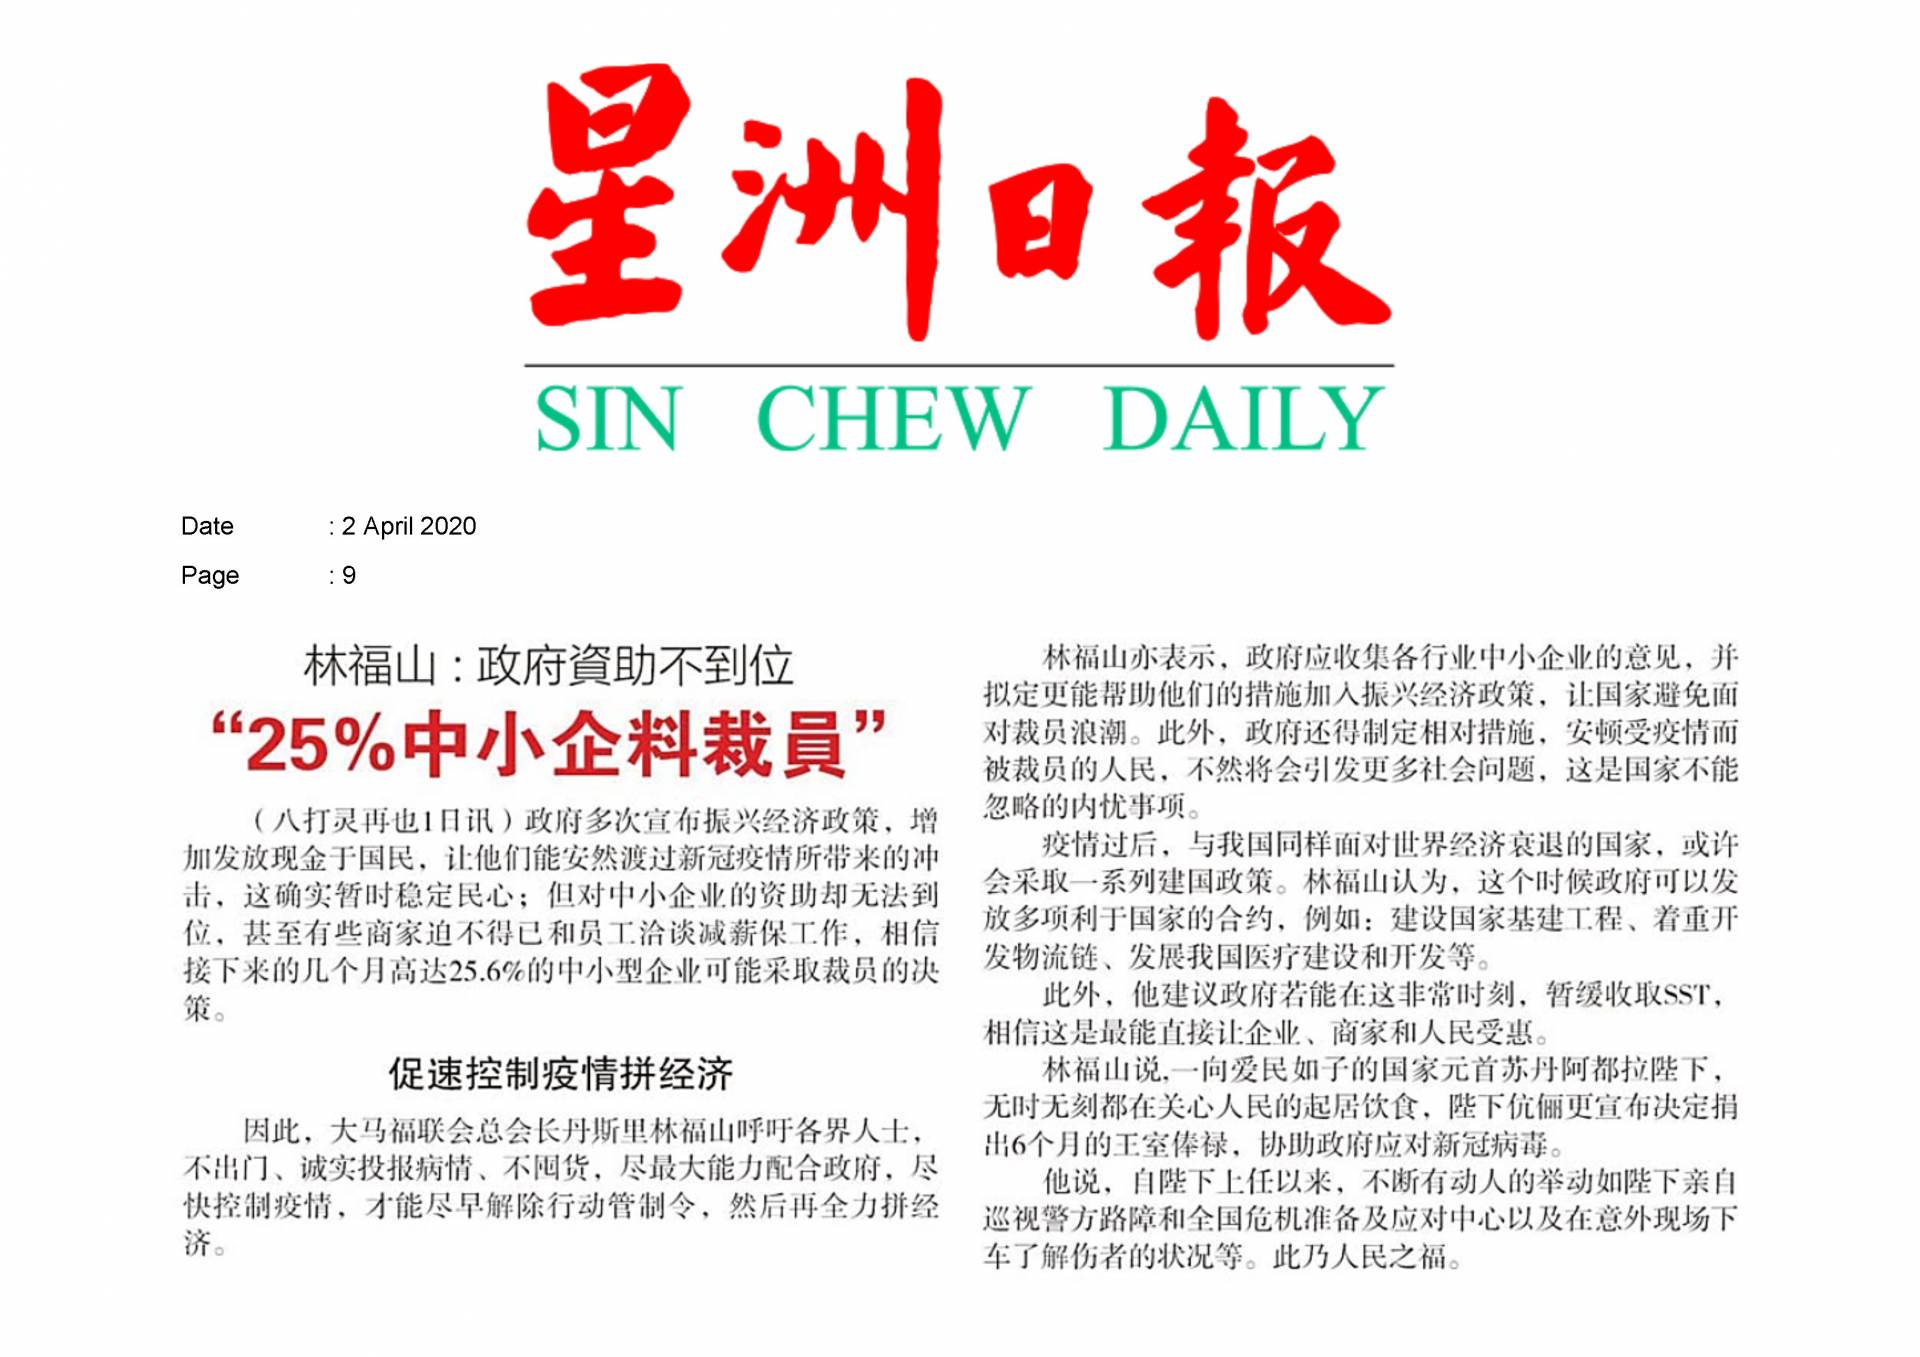 2020.04.02 Sin Chew - Lim Hock San said 25pct of SMEs expected to layoff